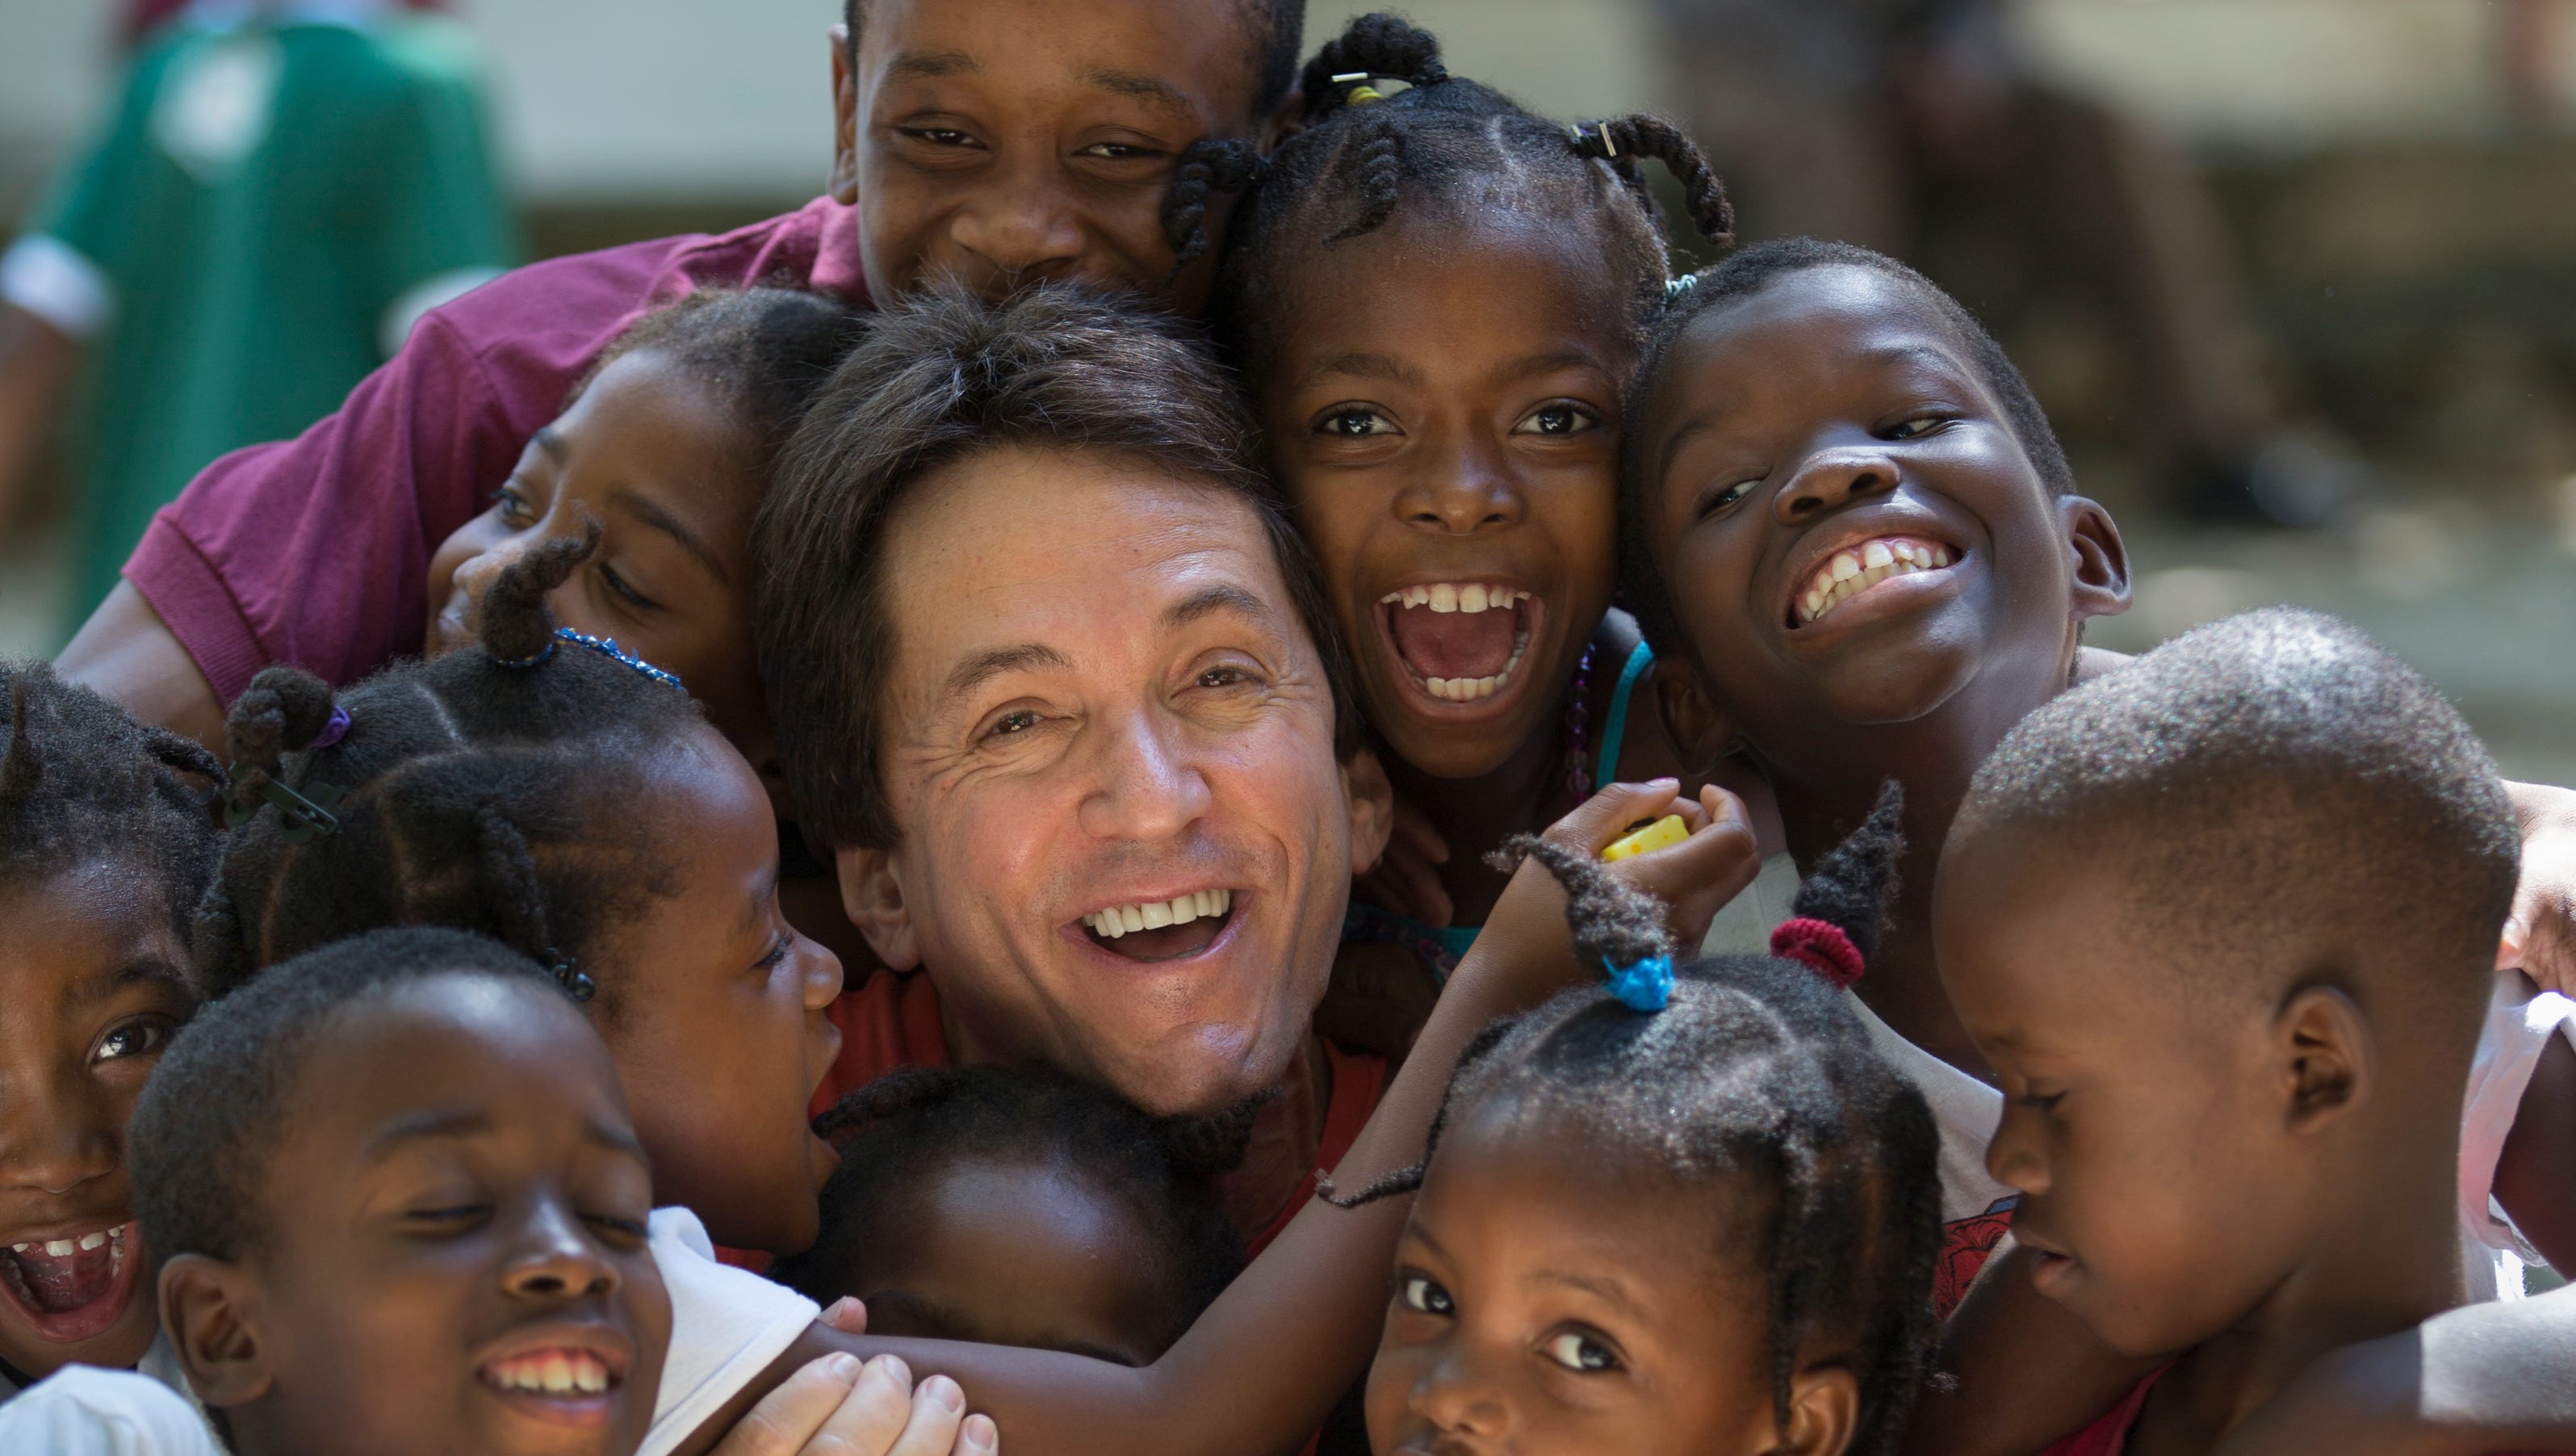 Working with Haiti's orphans: Smiles make it worthwhile3200 x 1800